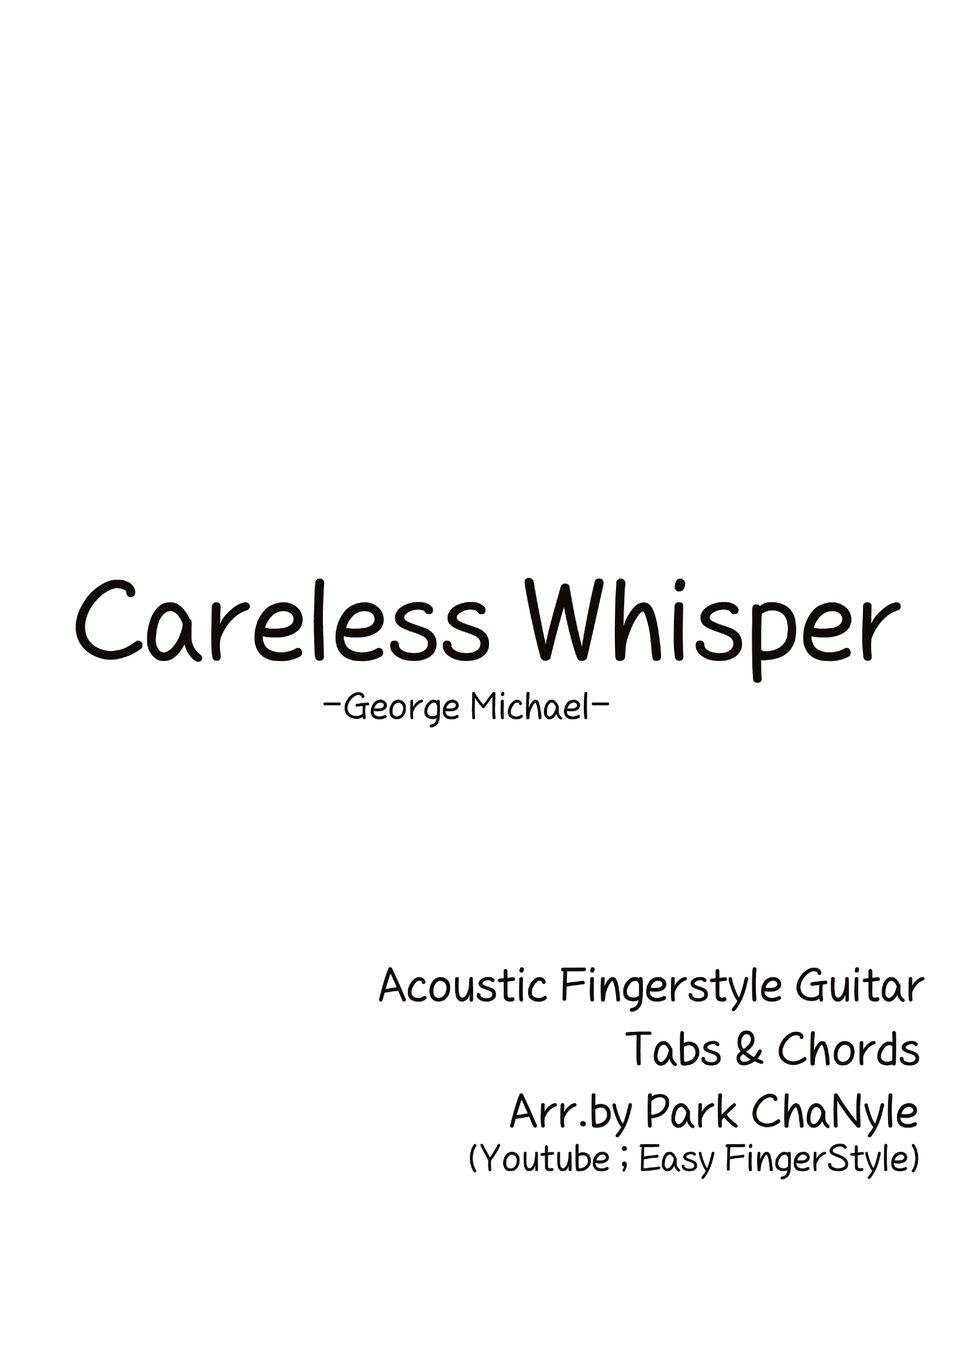 George Michael - Careless Whisper (Fingerstyle Guitar) by Park ChaNyle